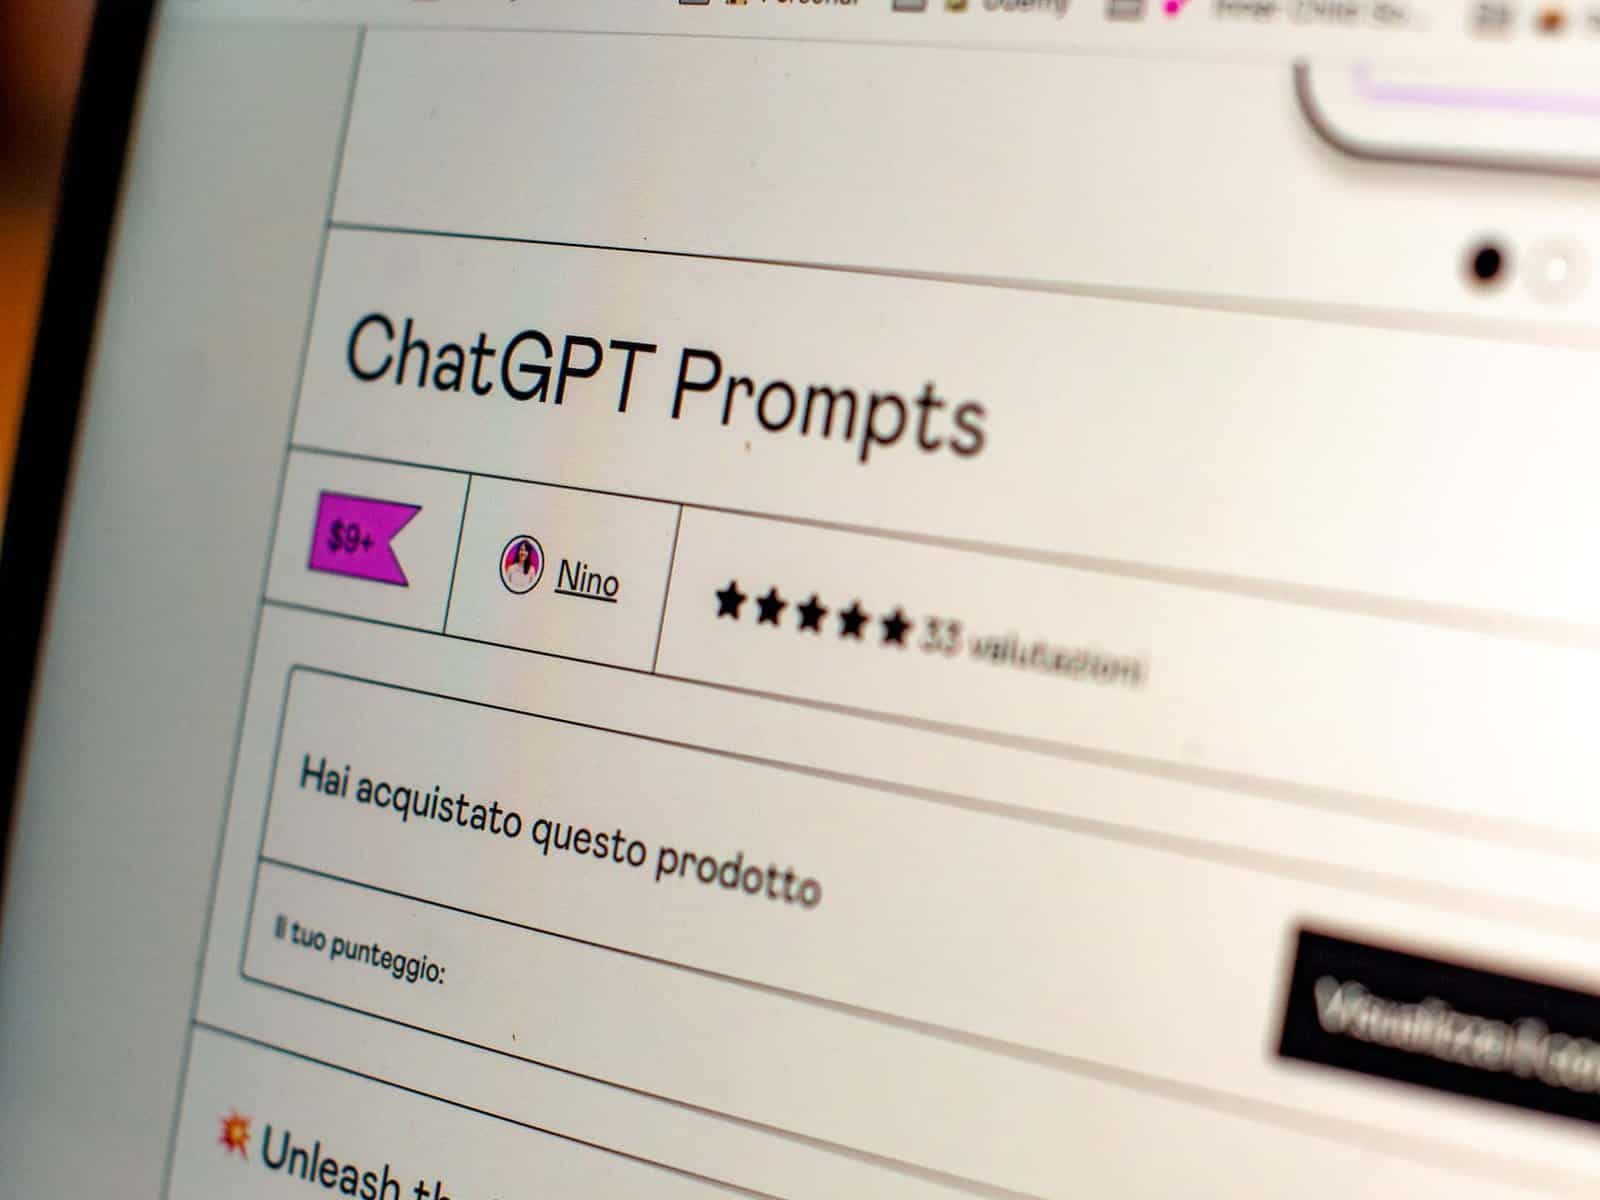 ChatGPT Error 429: Here's how to fix